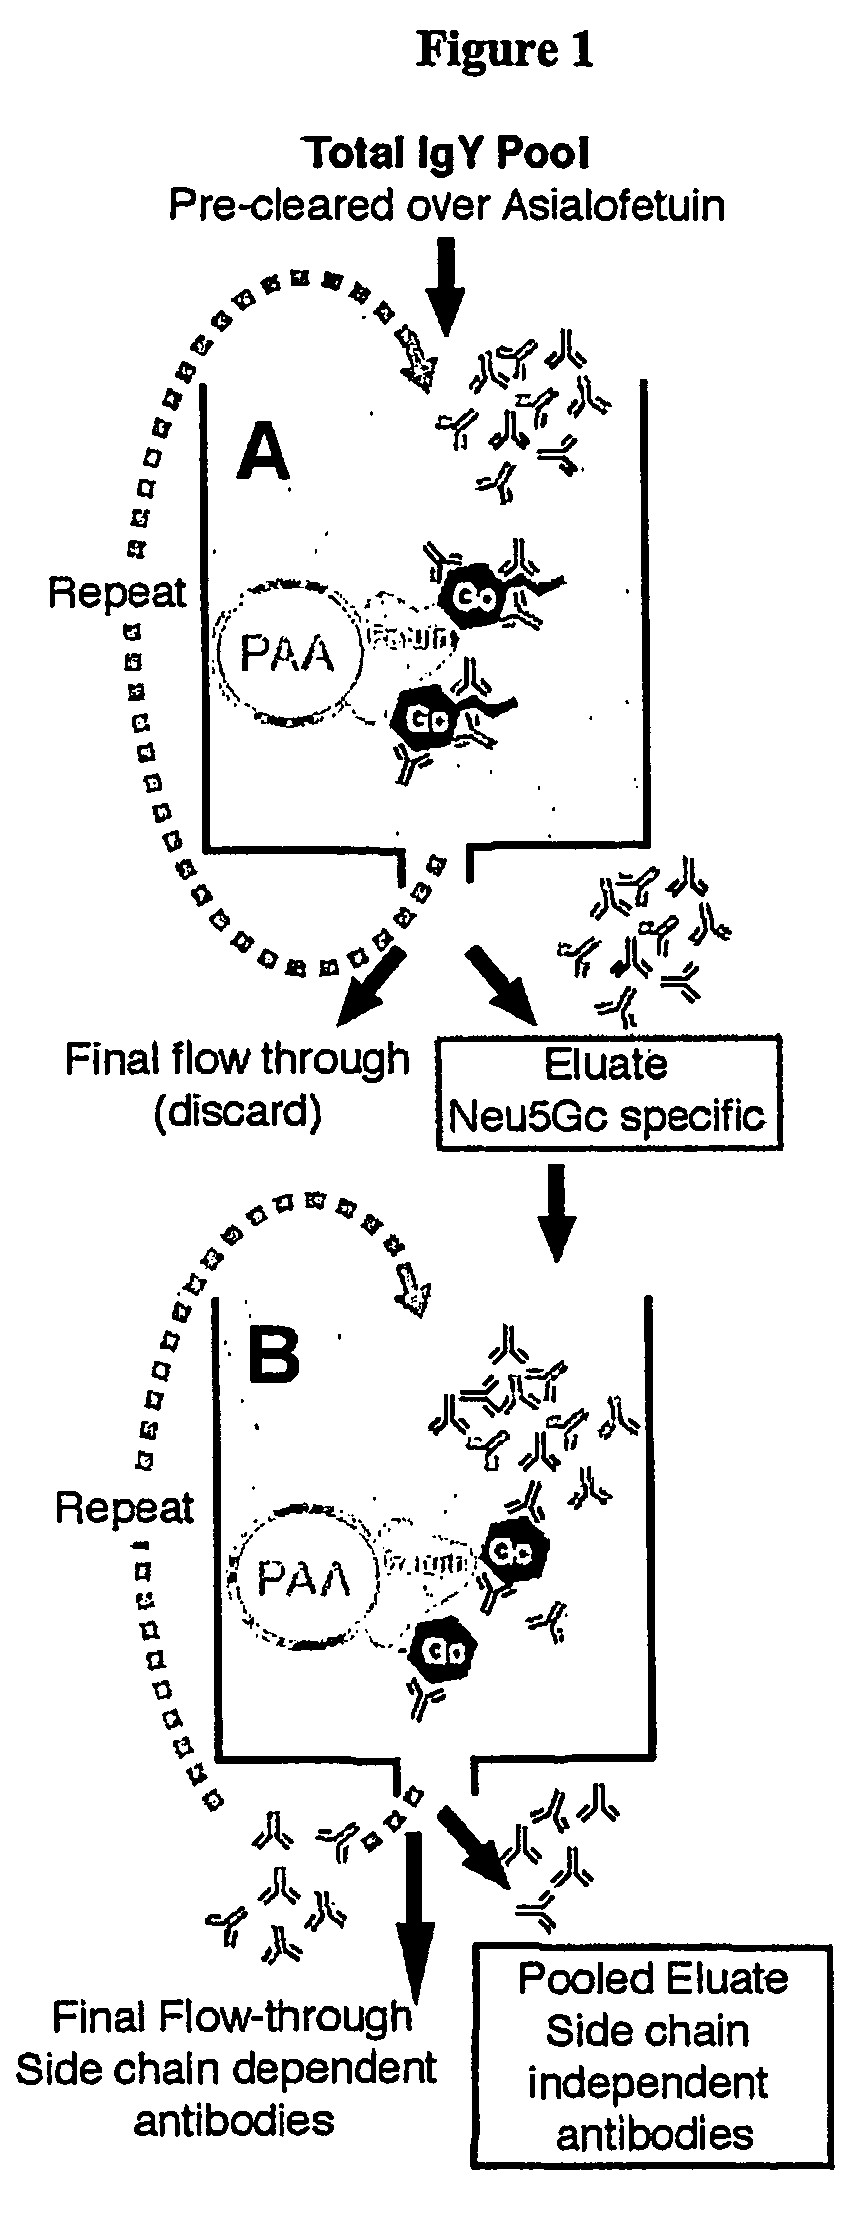 Methods for detecting and analyzing N-glycolylneuraminic acid (Neu5Gc) in biological materials